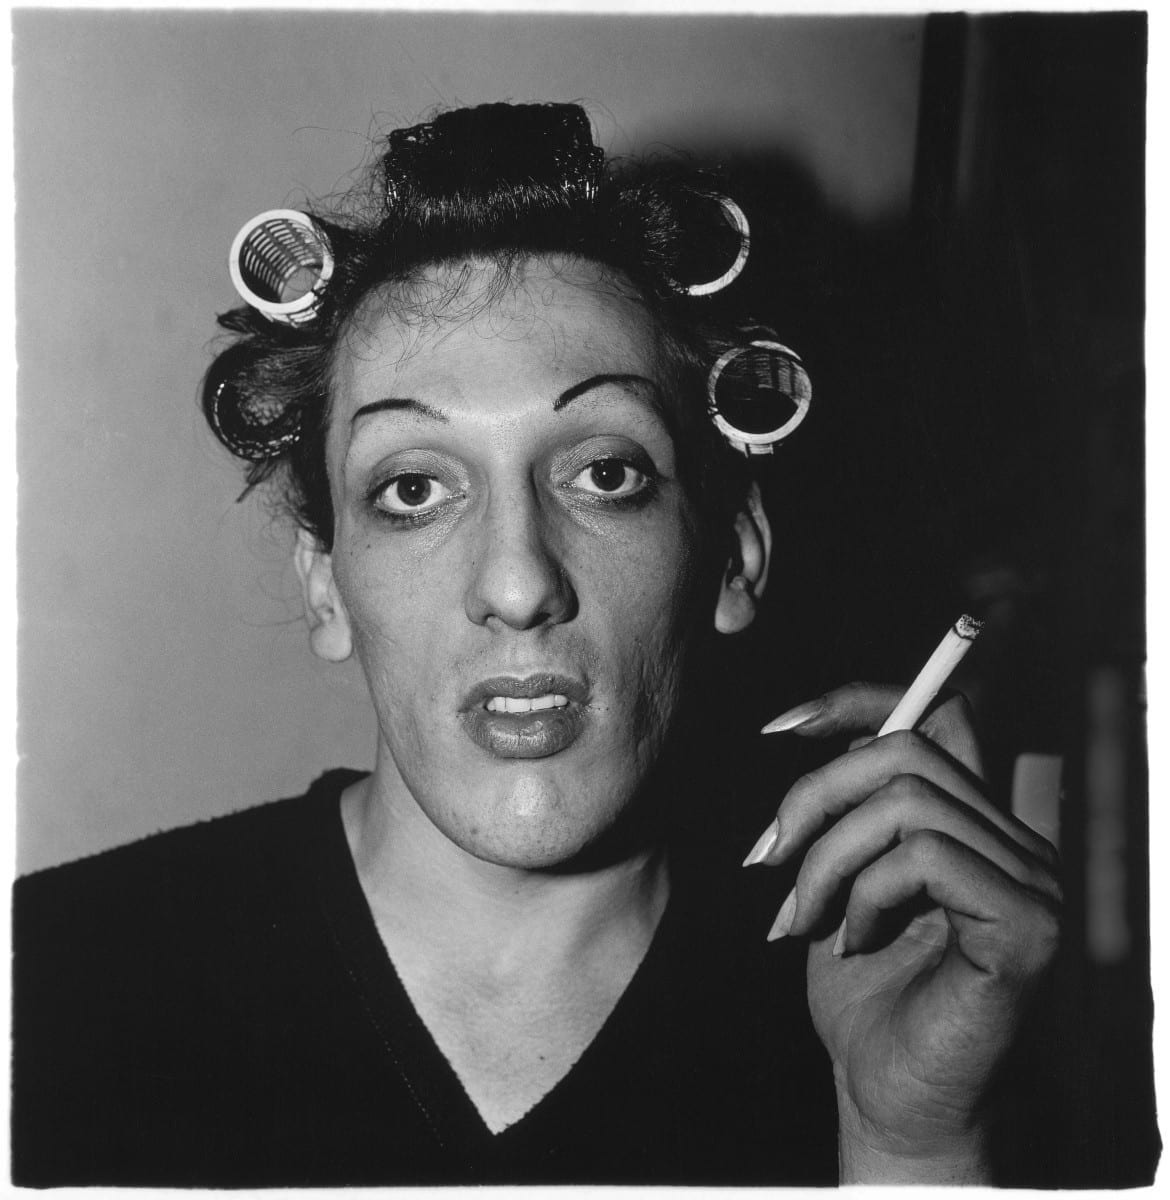 Person with curlers in their hair smoking a cigarette